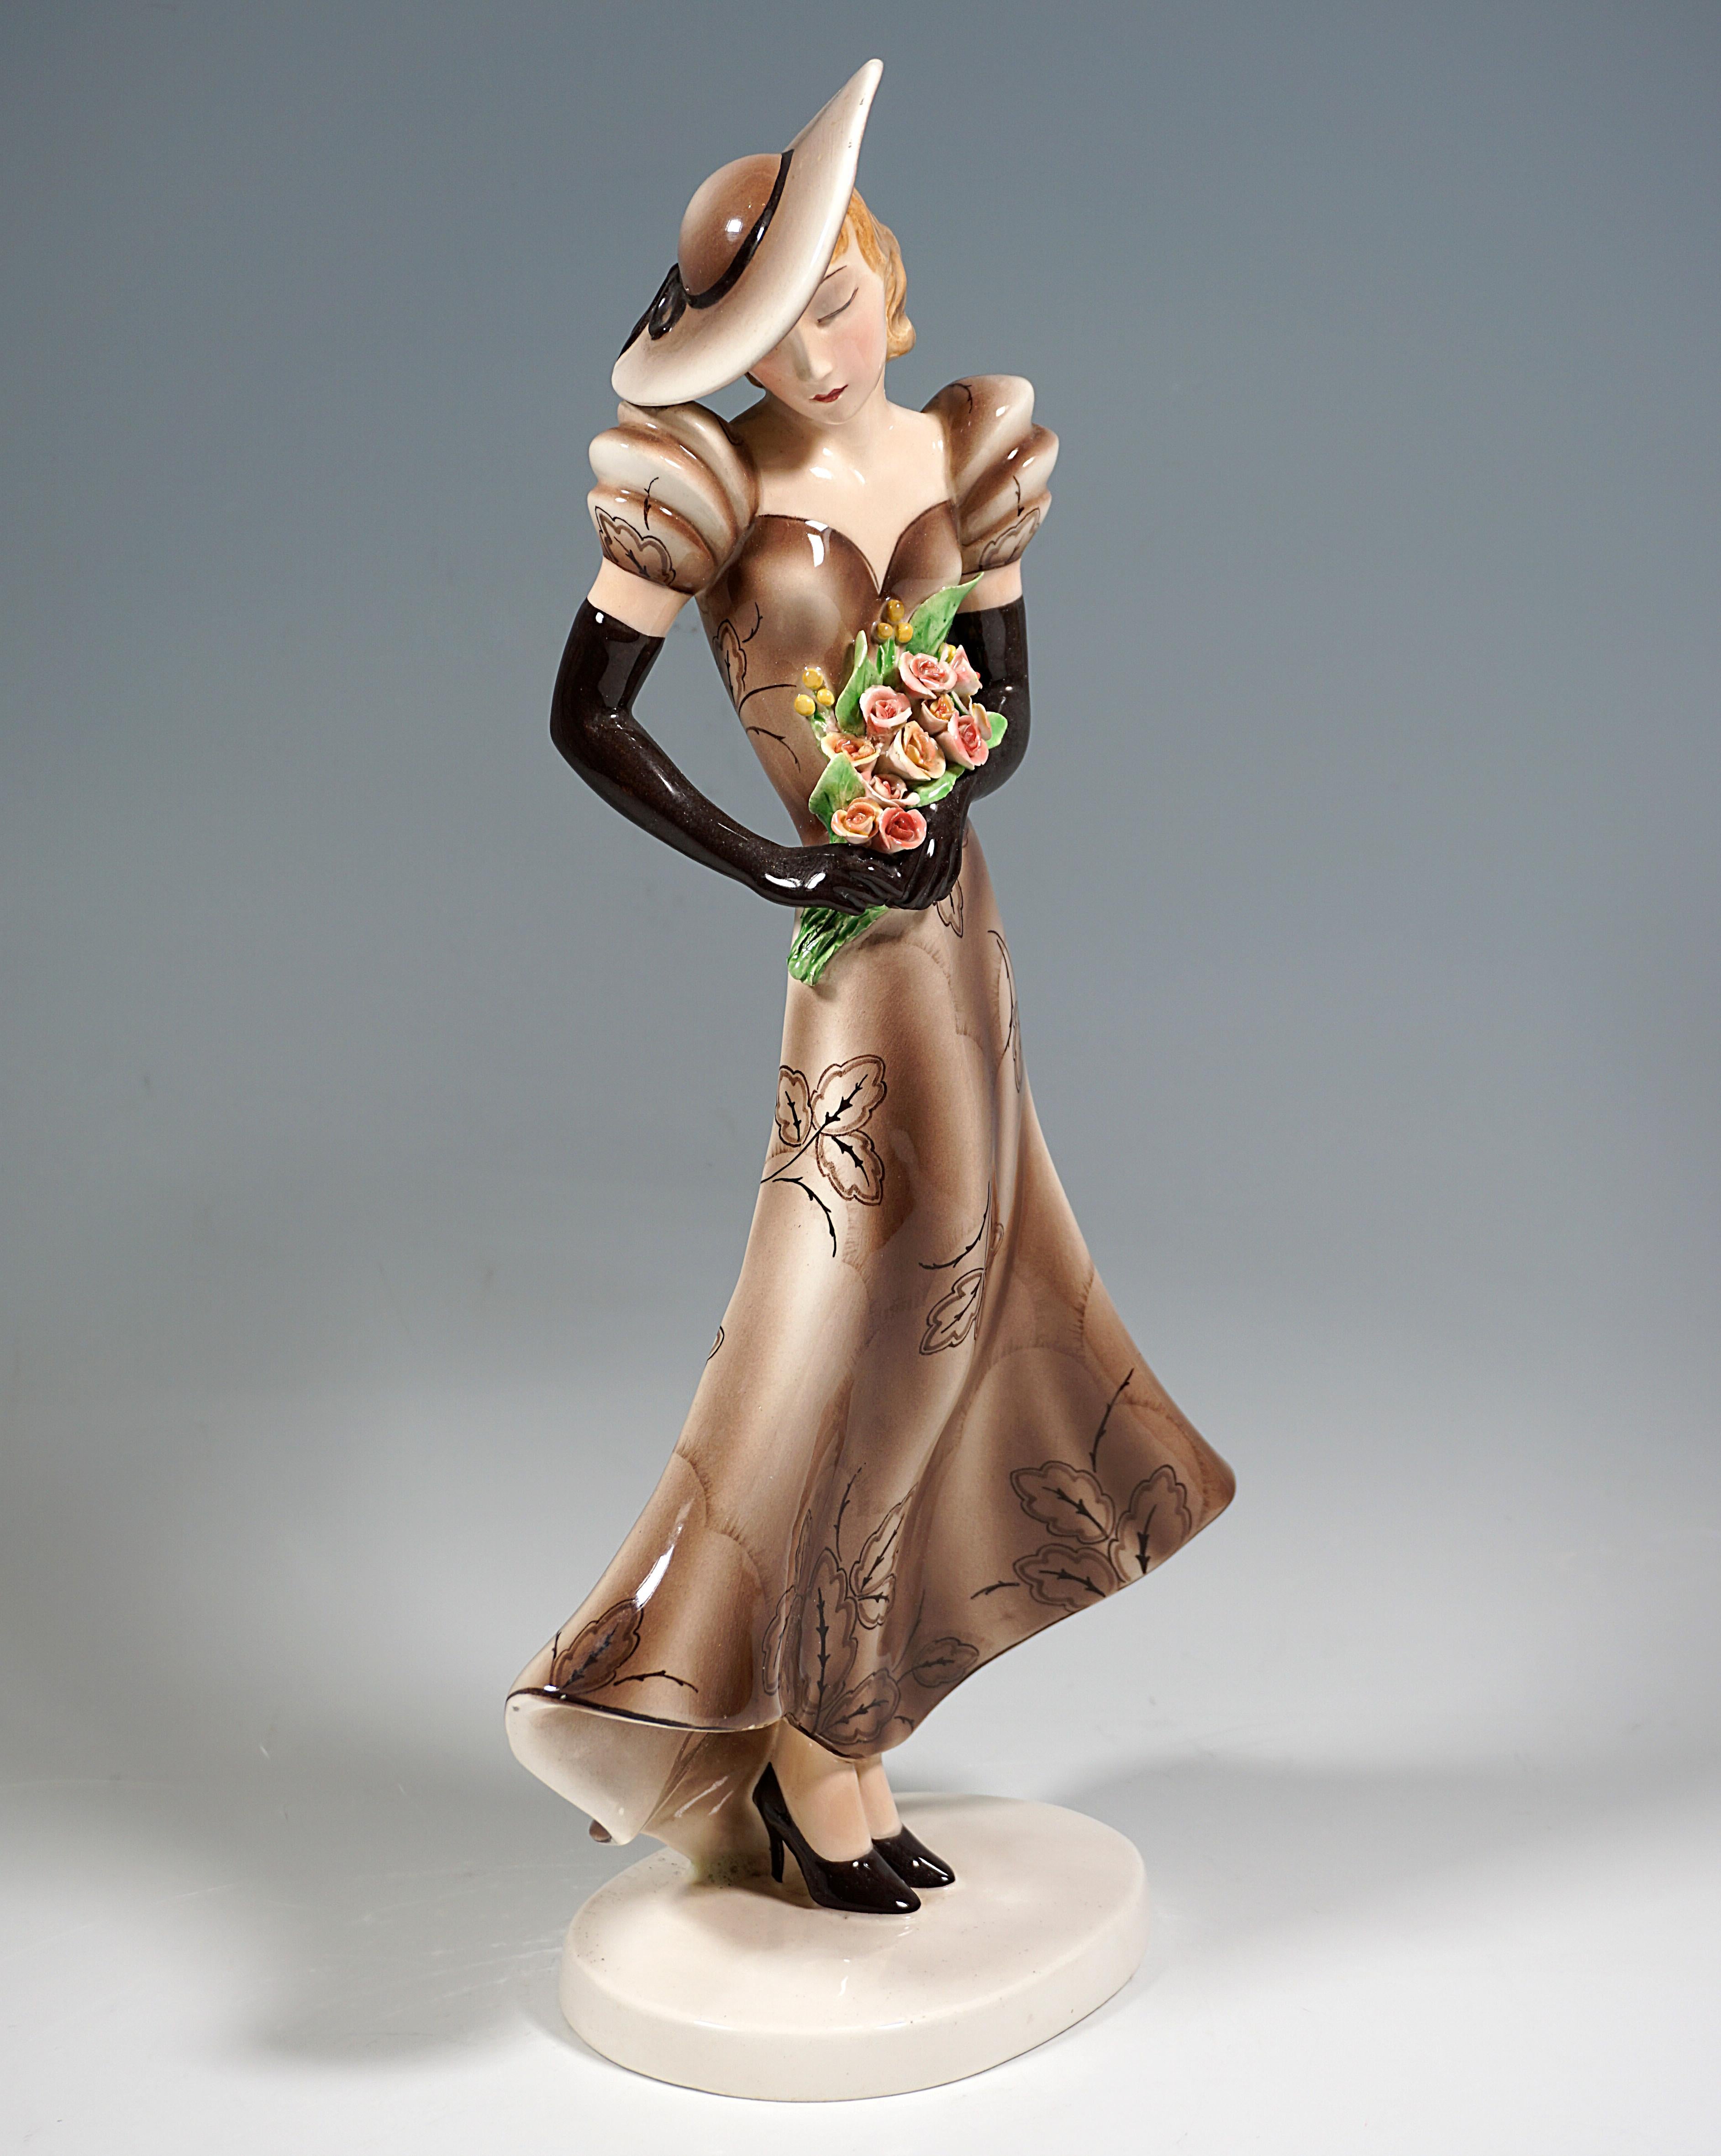 Rare Goldscheider Art Deco ceramic Figurine of the 1930s:
Elegant standing young blond lady in long light brown dress patterned with stylized leaves with low back, puffed sleeves and long gloves, her head with wide-brimmed brown hat tilted to one